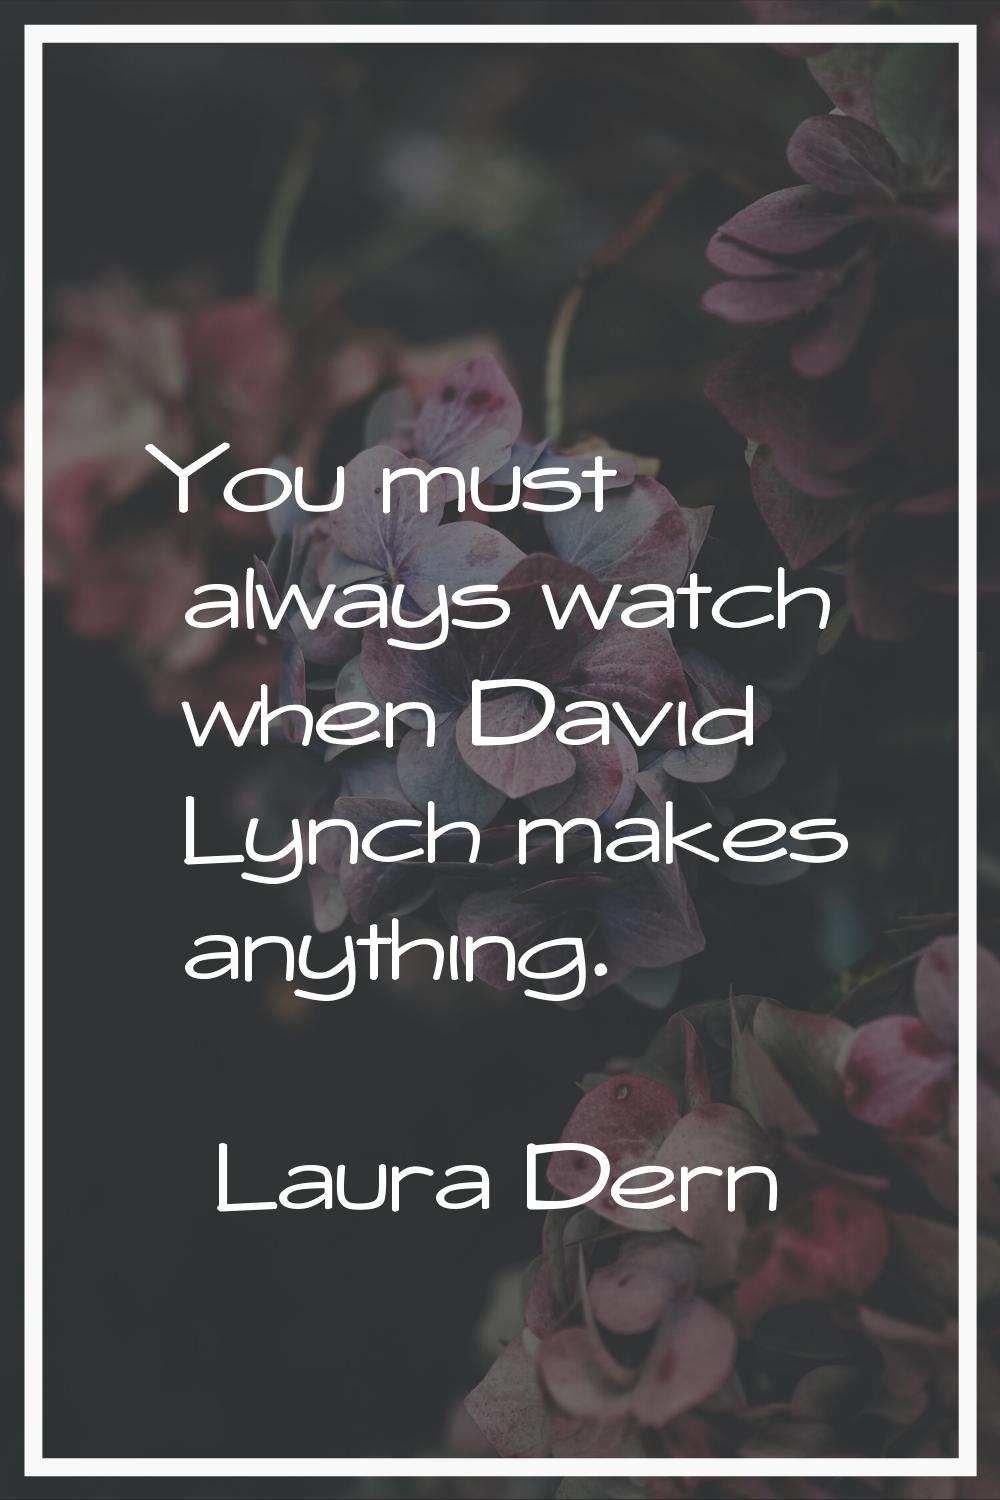 You must always watch when David Lynch makes anything.